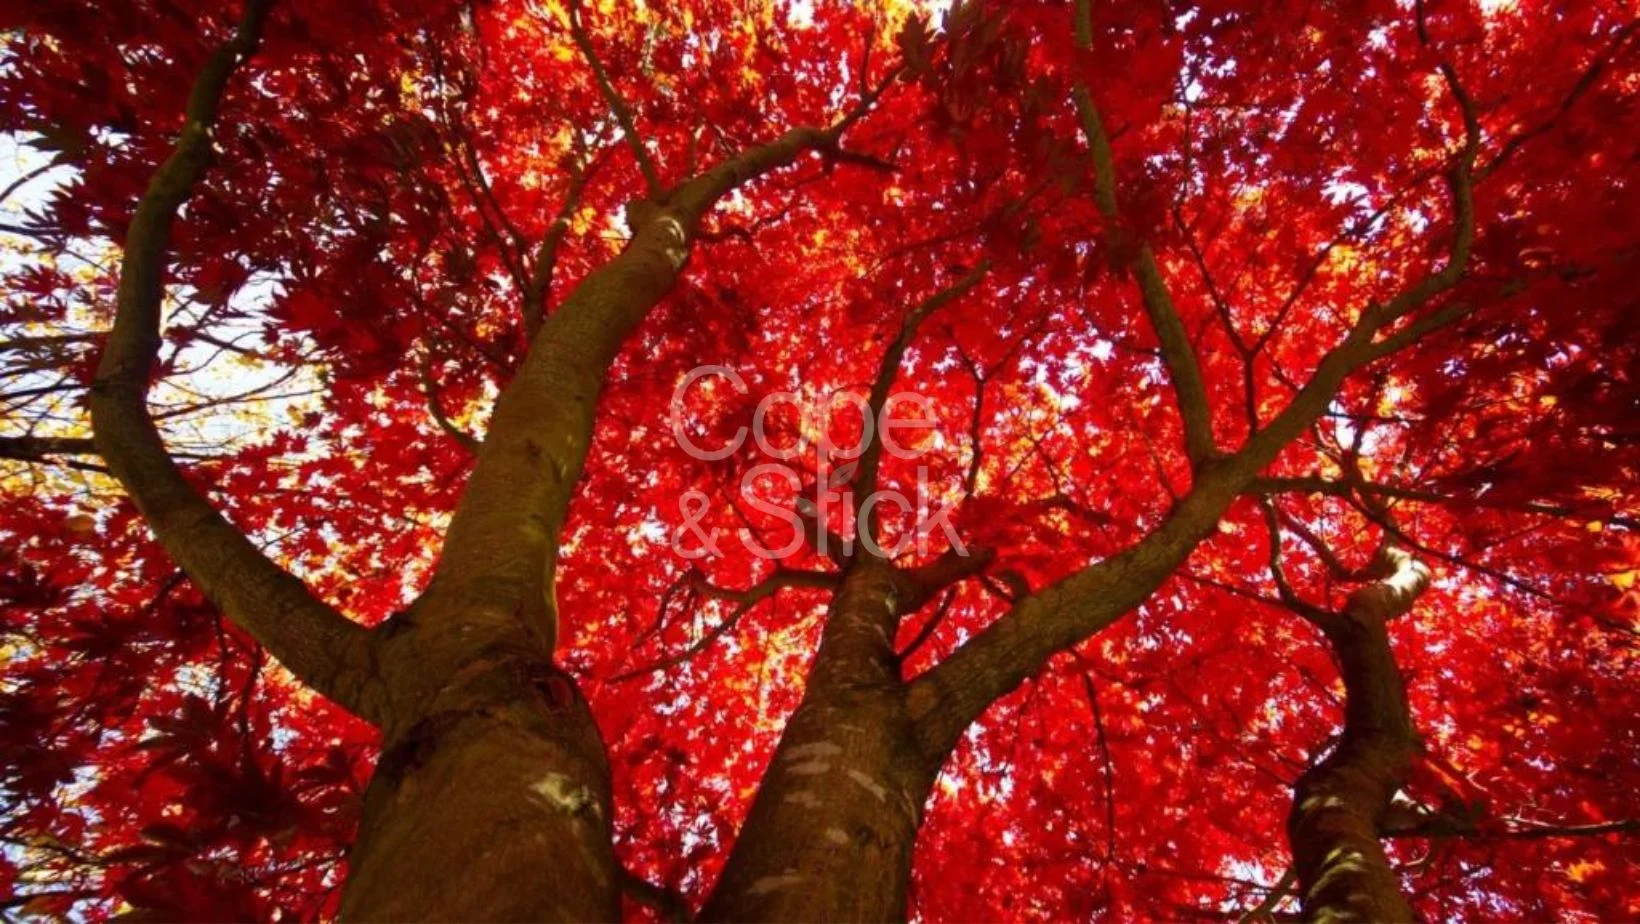 Maple tree with red leaves